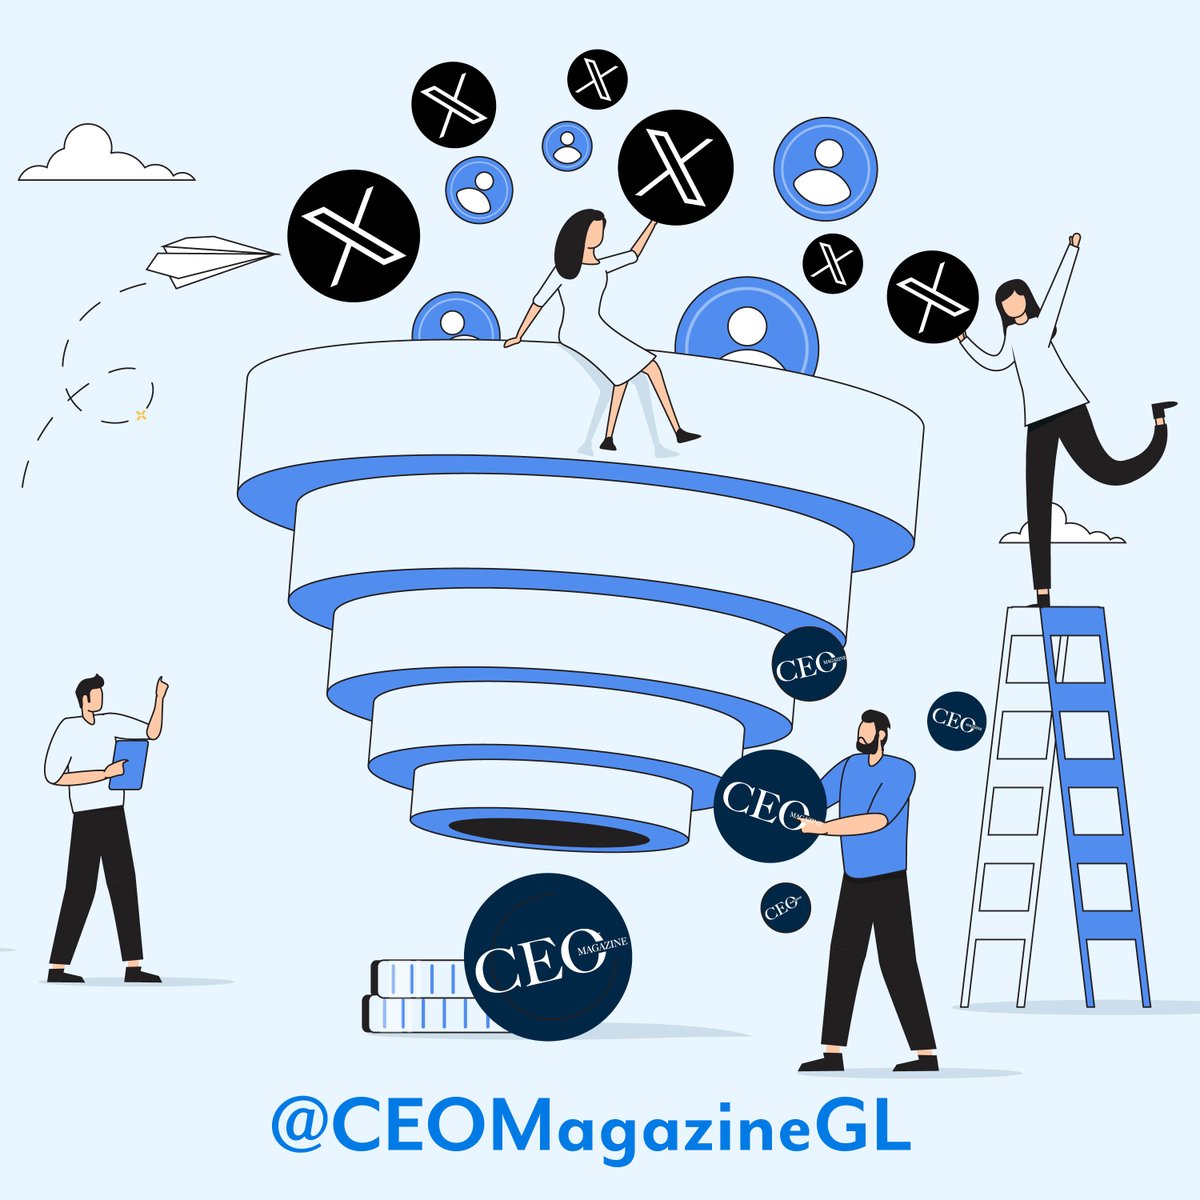 Exciting news – our Twitter pages are merging into one! Follow us @CEOMagazineGL (The CEO Magazine) for a unified experience, inspiring content and updates. We can’t wait to connect with you all in one place!